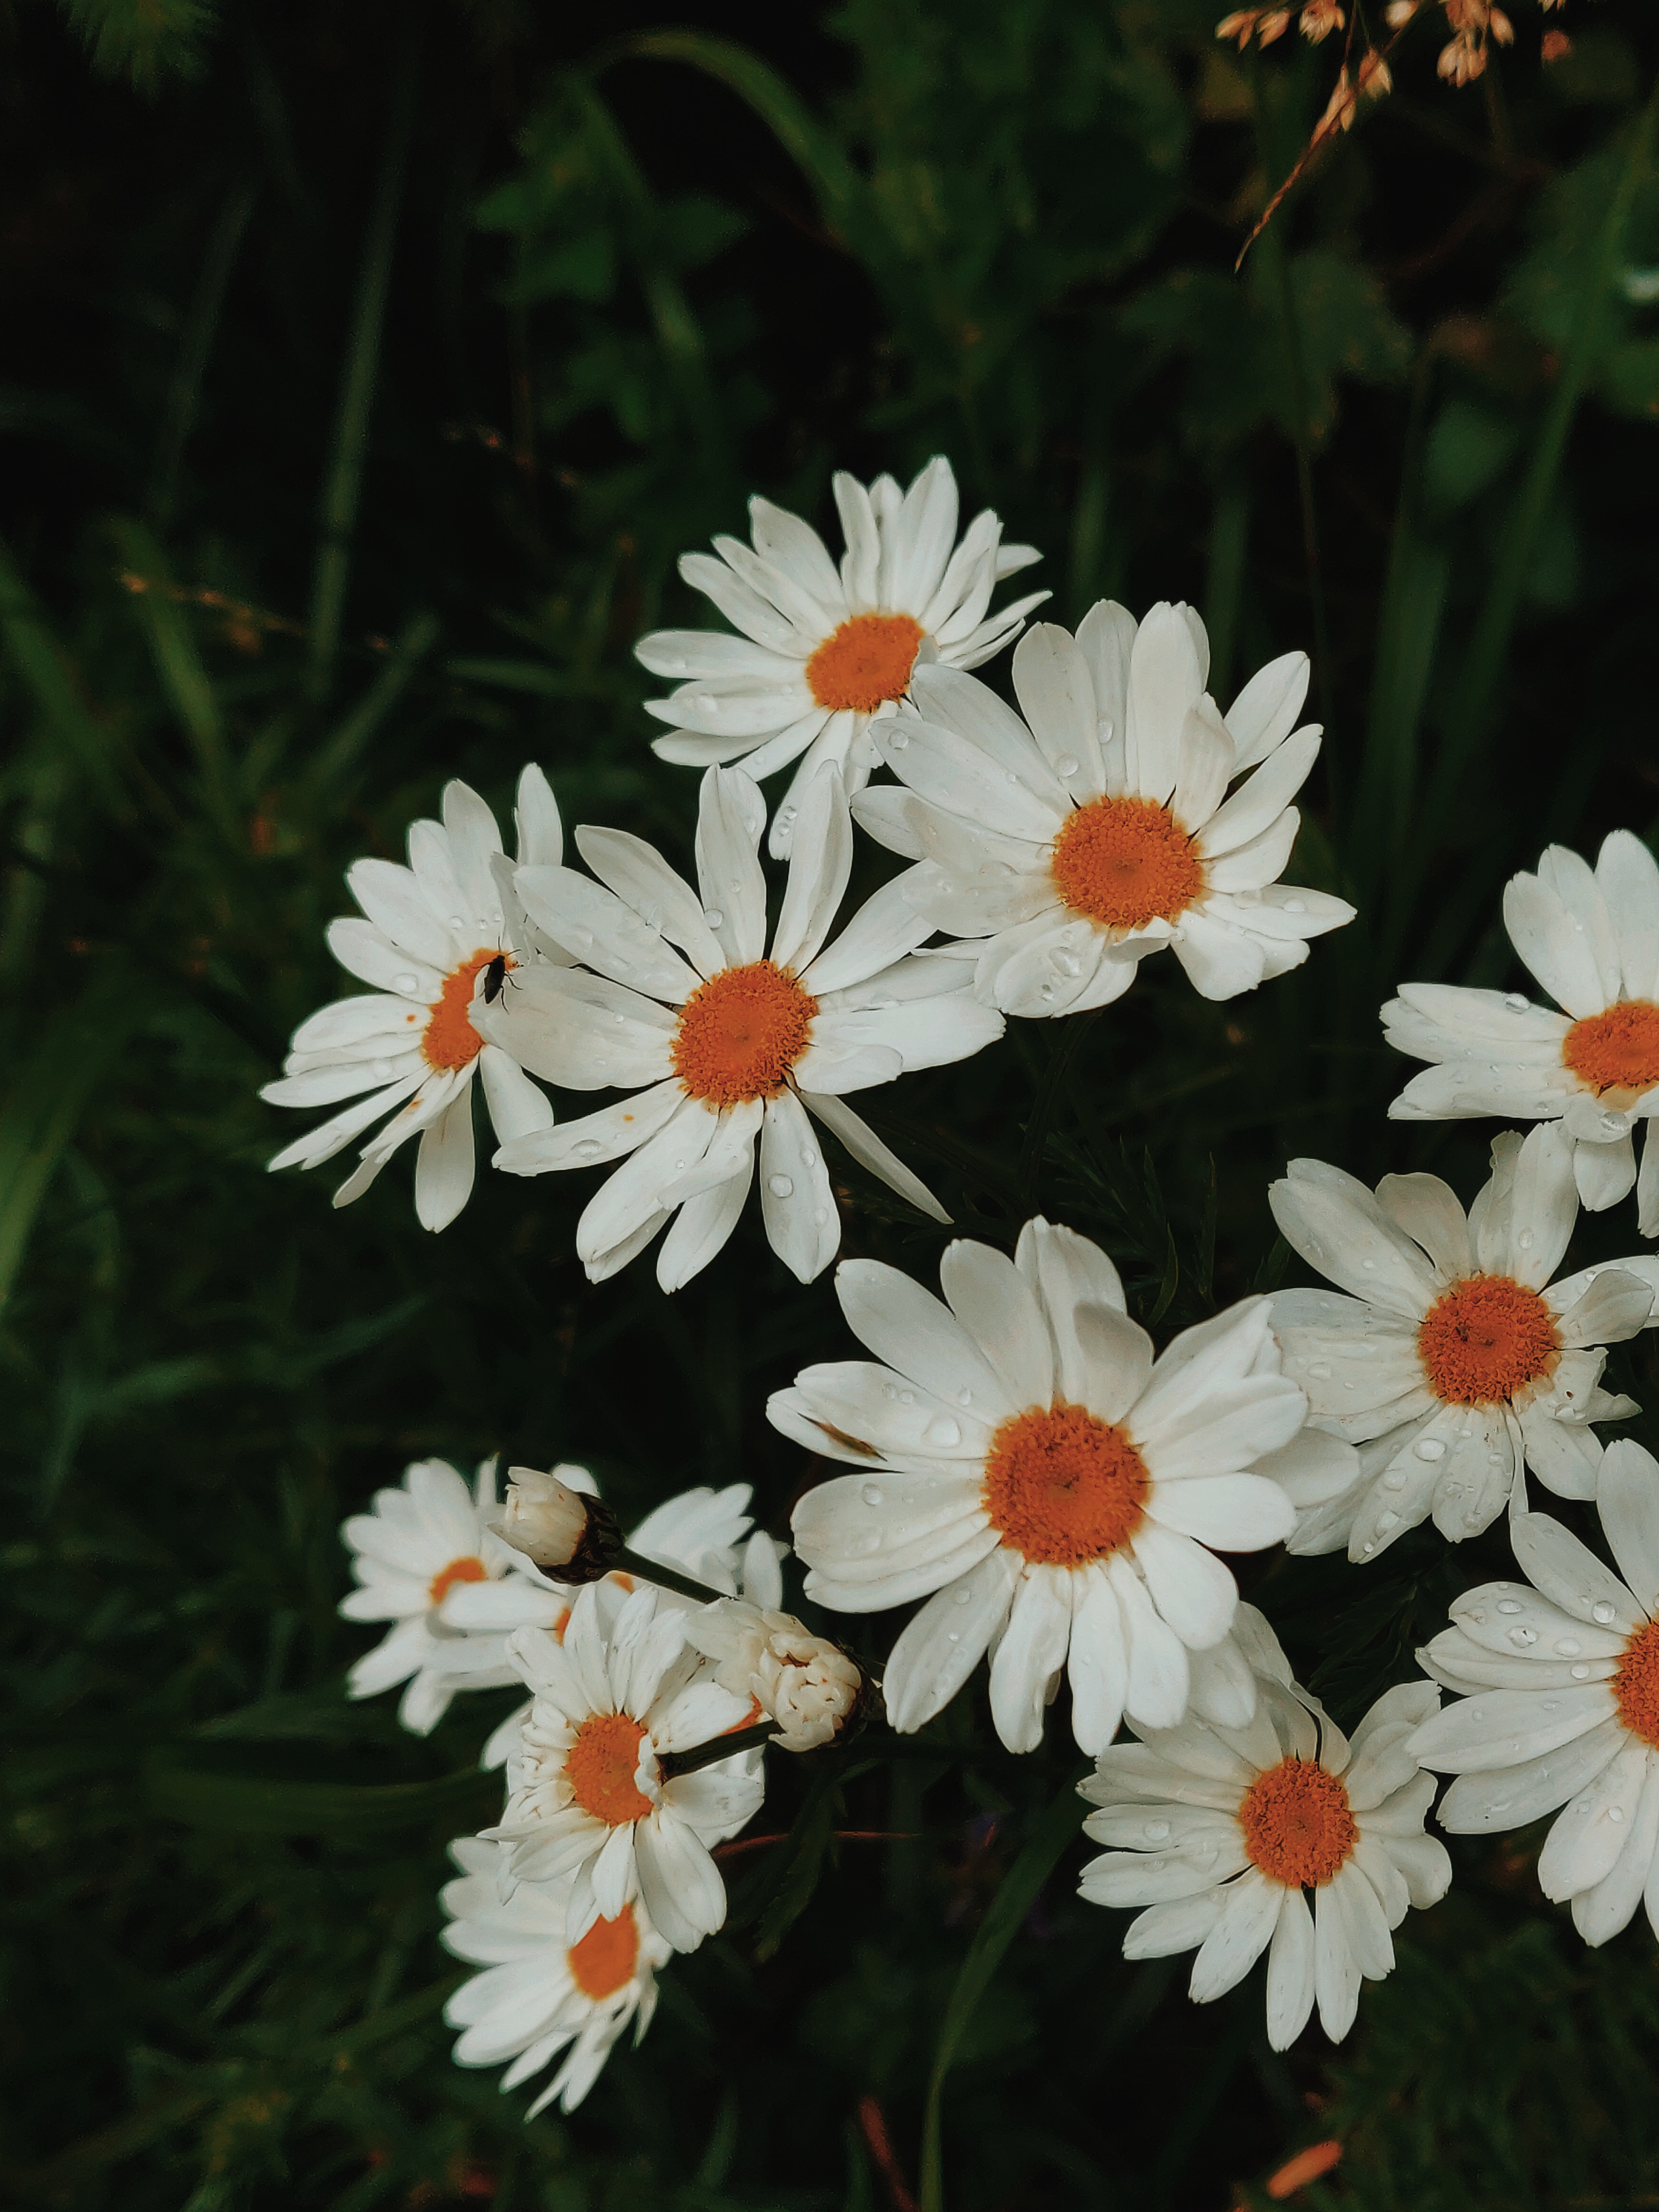 A bunch of white flowers with orange centers - Daisy